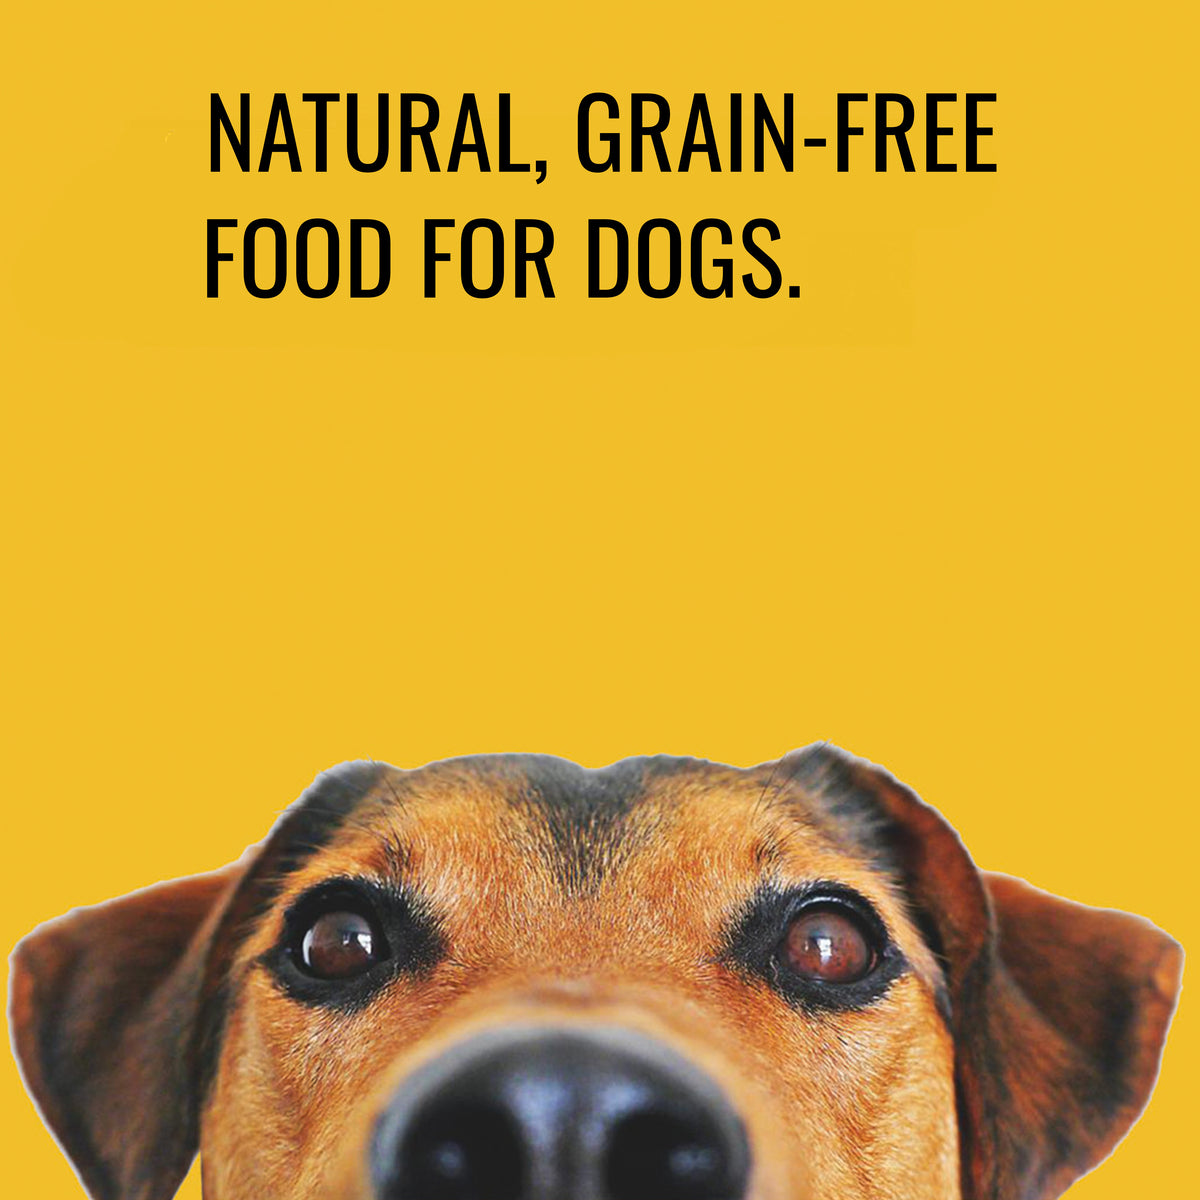 http://www.bettyandbutch.co.uk/cdn/shop/collections/Natural-Grain-Free-Healthy-Dog-Food-from-Betty-and-Butch-UK_46db99a5-c853-4744-8d1e-25fa33022b14_1200x1200.jpg?v=1653476643